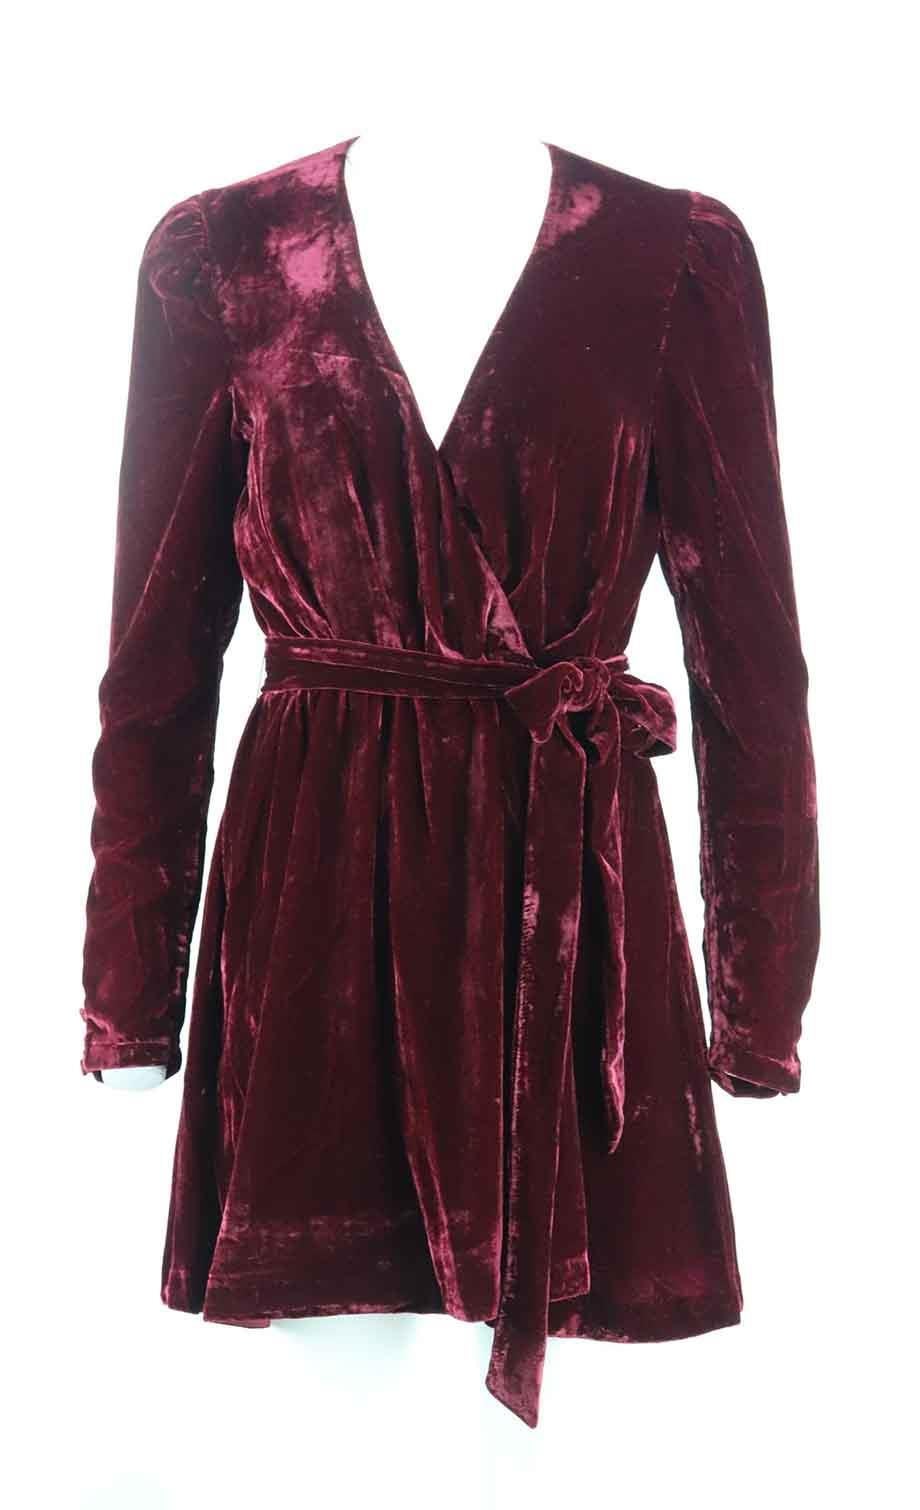 This mini dress by L’Academie is cut from sumptuous velvet, it has romantic blouson sleeves and an A-line skirt and wrap fastening. Red velvet. Tie fastening at front. 80% Nylon, 20% rayon; lining: 100% polyester. Size: Medium (UK 10, US 6, FR 38,